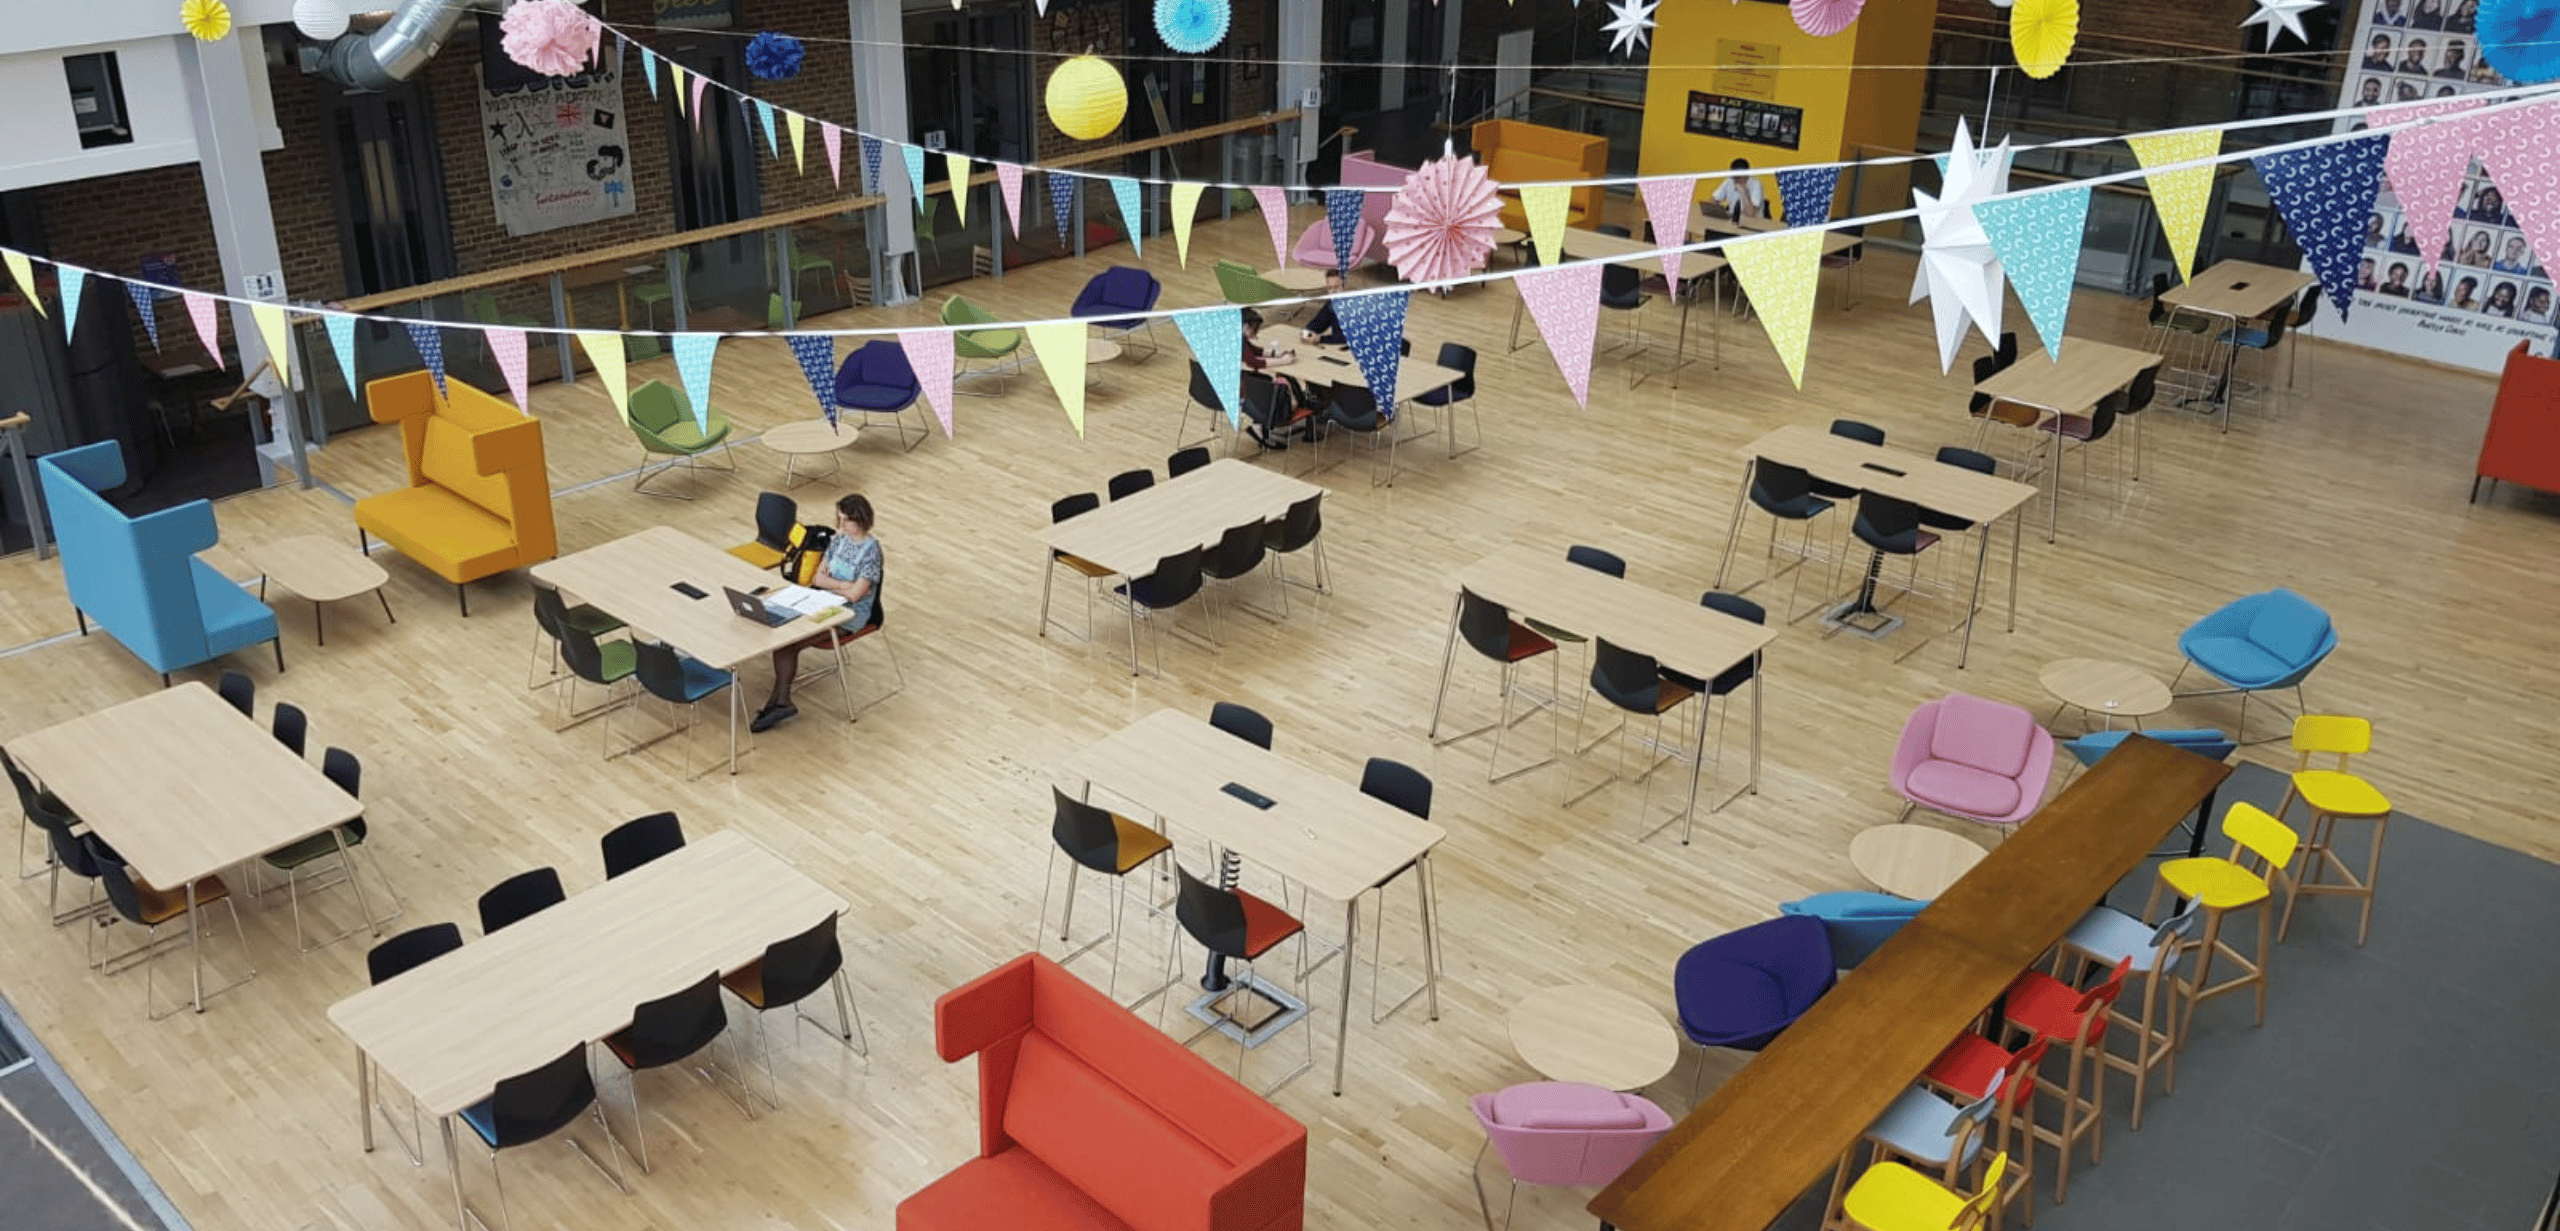 A large open space with colourful tables and chairs and office seating.